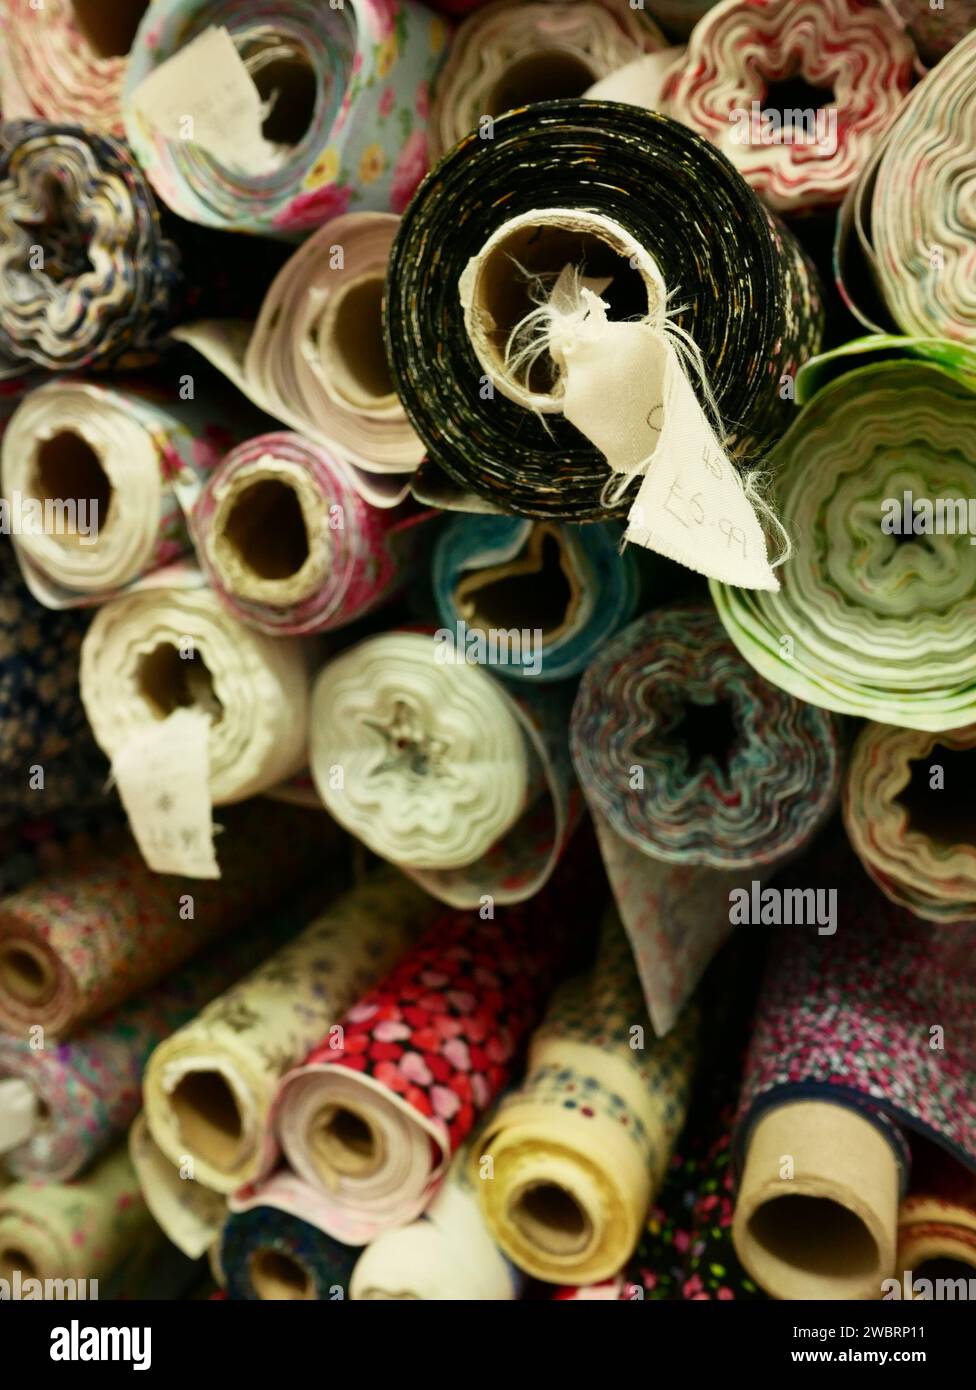 Fabric rolls in a shop for sewing fabric and materials. Stock Photo